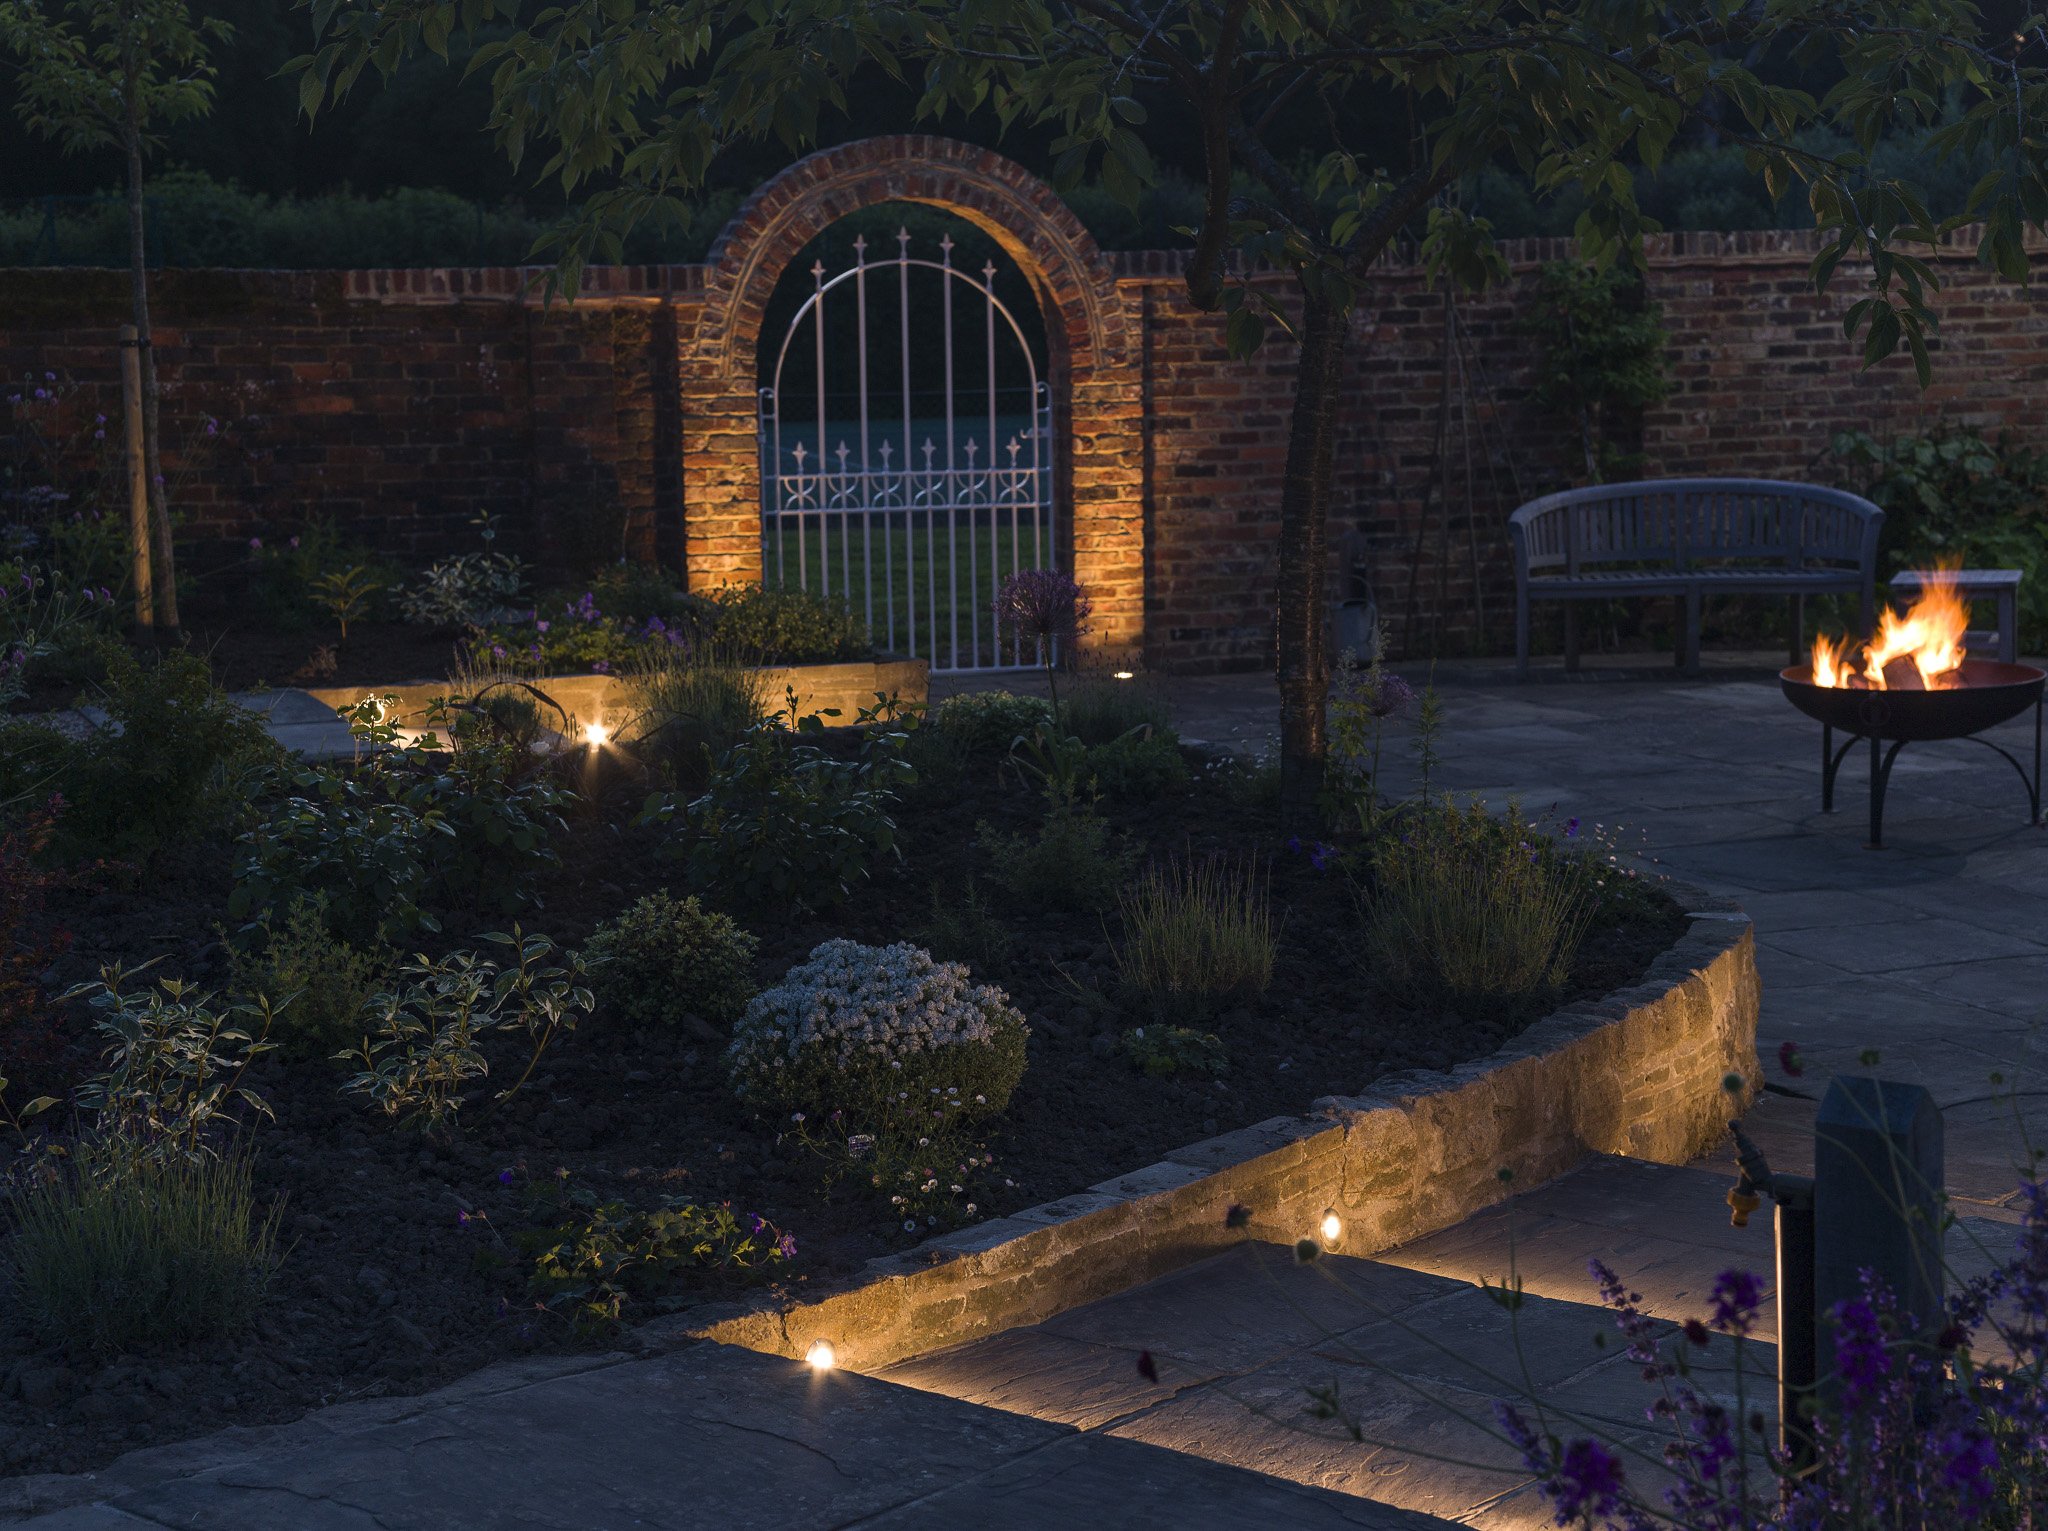 patio-paving-contractors-lighting-design-near-me-surrey-sussex-hampshire-valley-projects (10).jpg